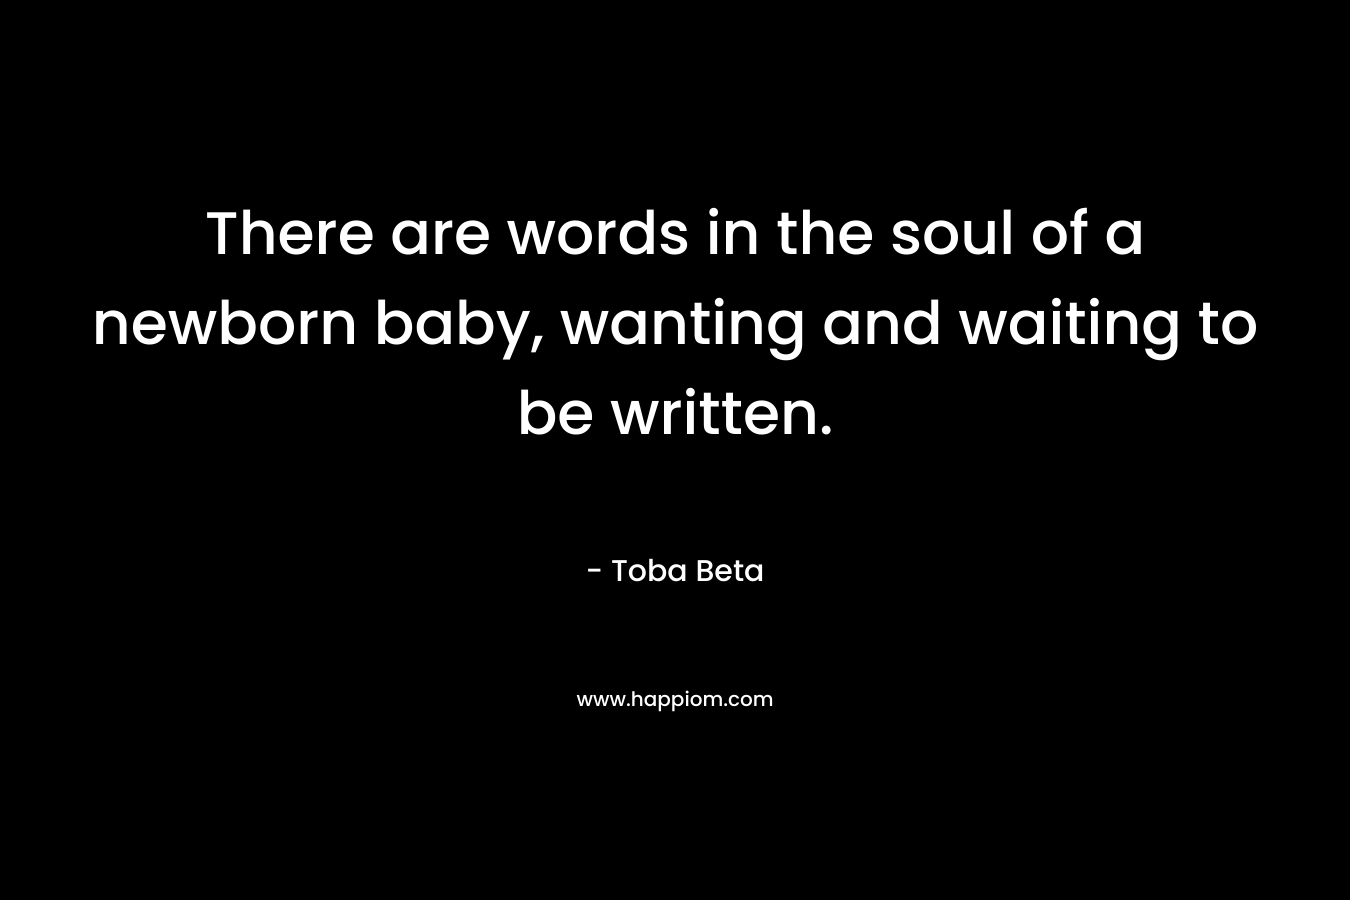 There are words in the soul of a newborn baby, wanting and waiting to be written.